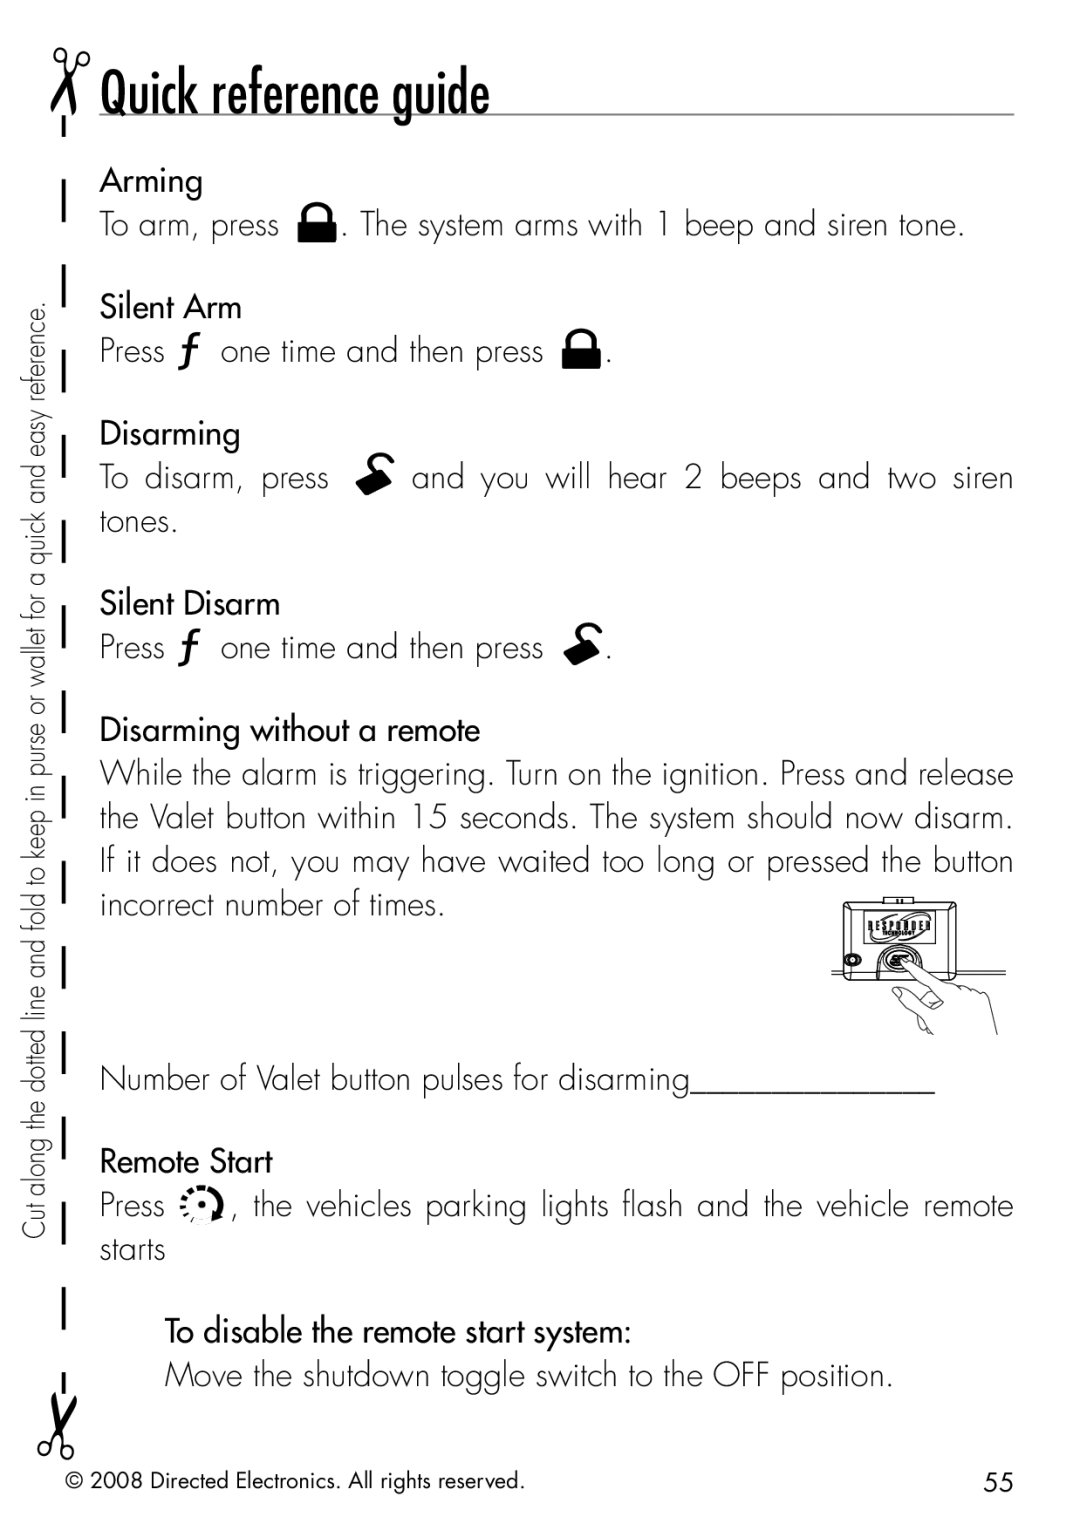 Clifford 50.7X manual Quick reference guide, Disarming without a remote 